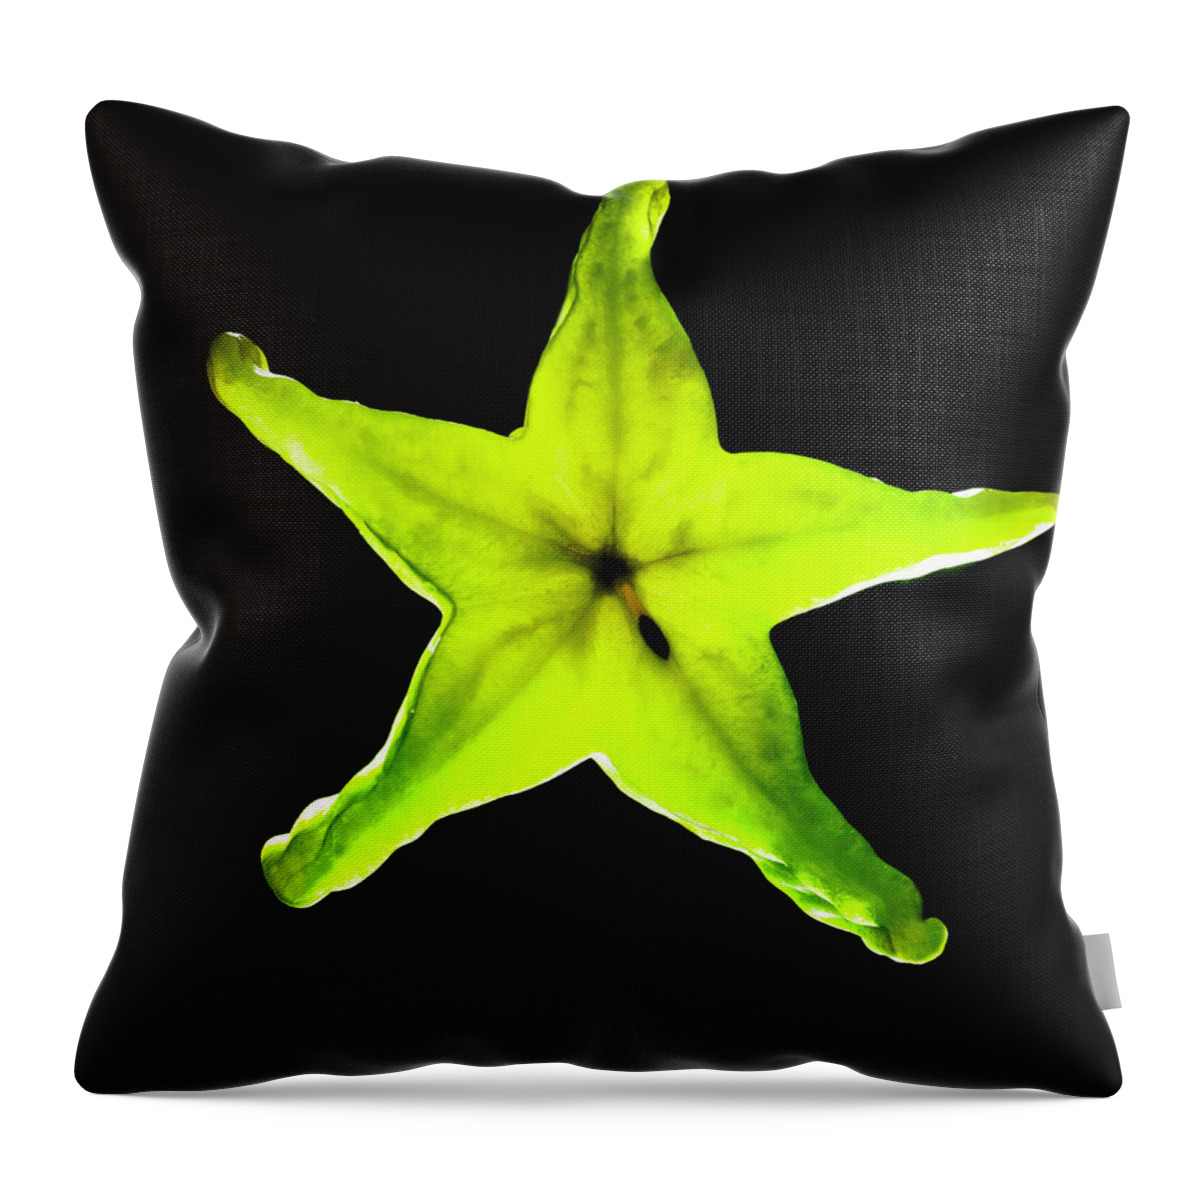 California Throw Pillow featuring the photograph Organic Star Fruit by Monica Rodriguez